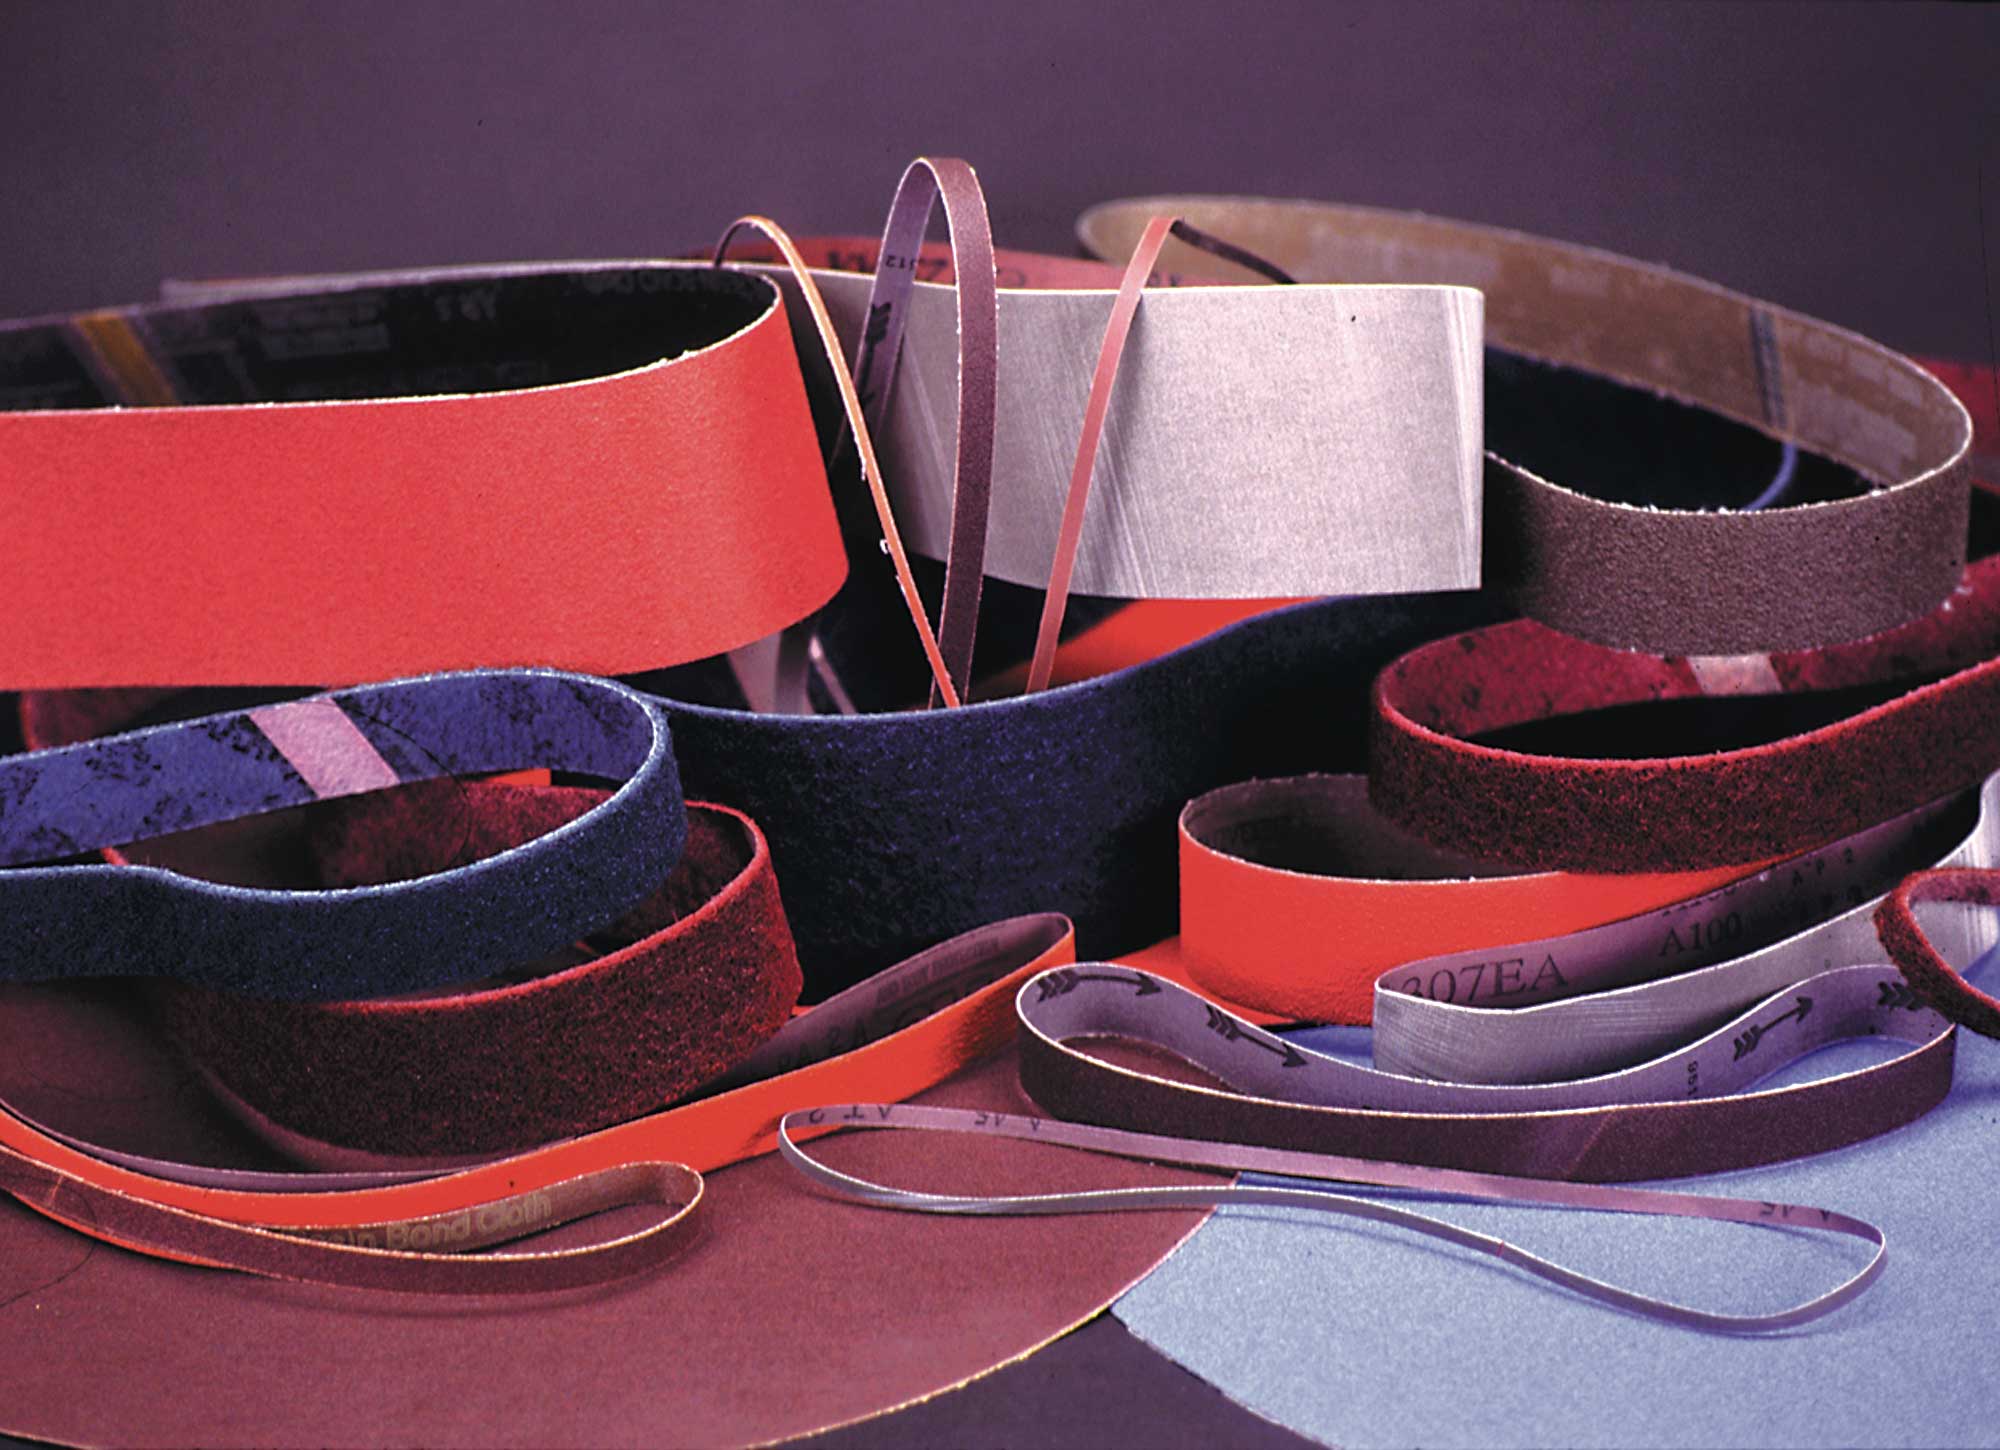 Abrasive belts of all sizes